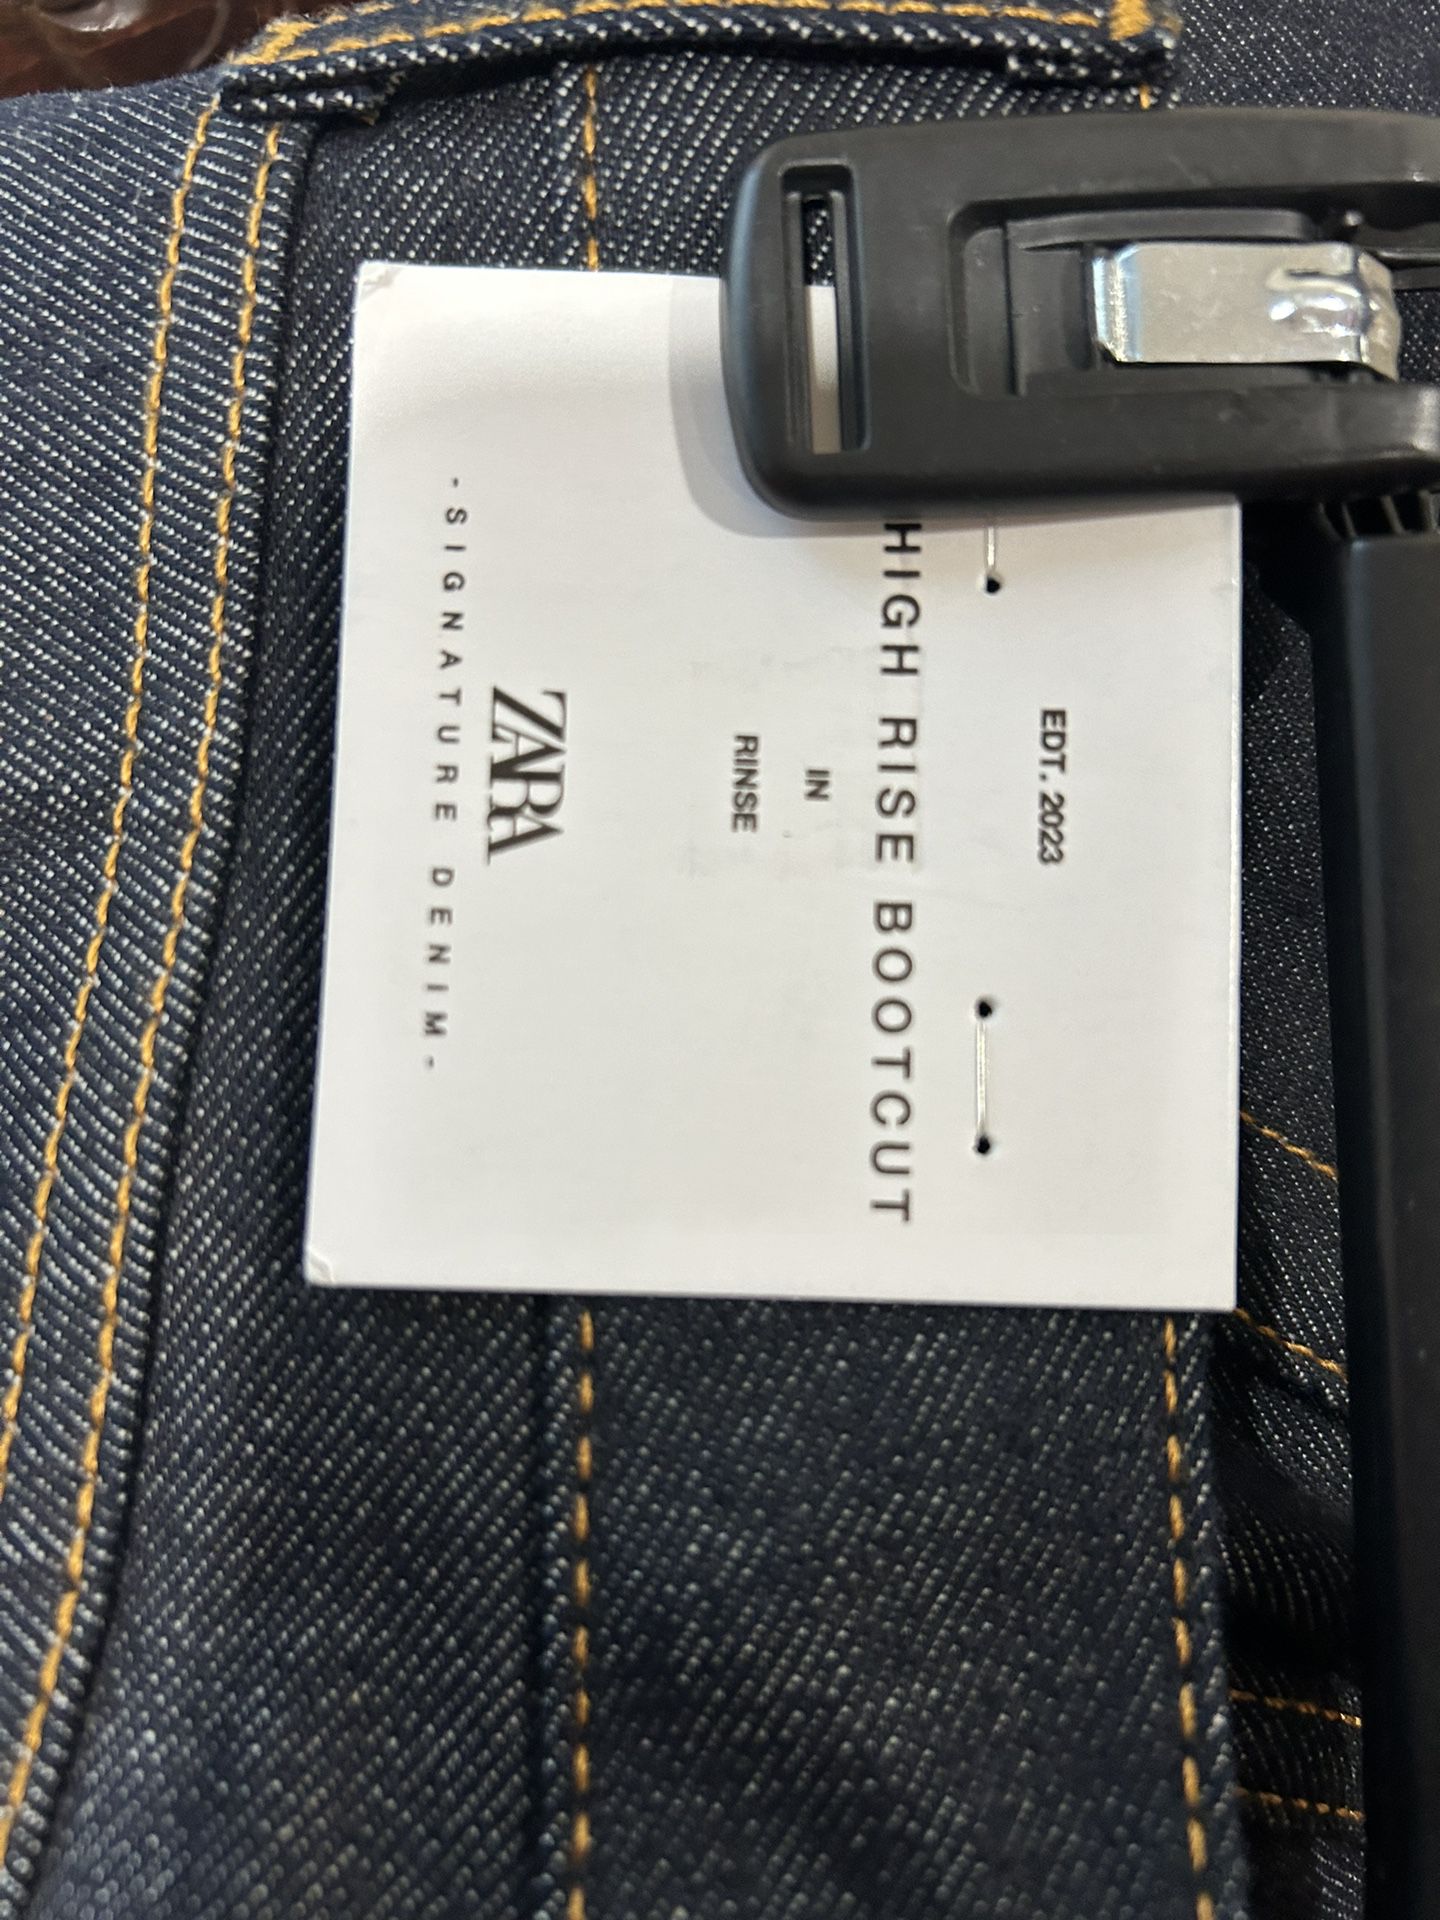 Zara Full Length Pants in Oyster White for Sale in Long Beach, CA - OfferUp